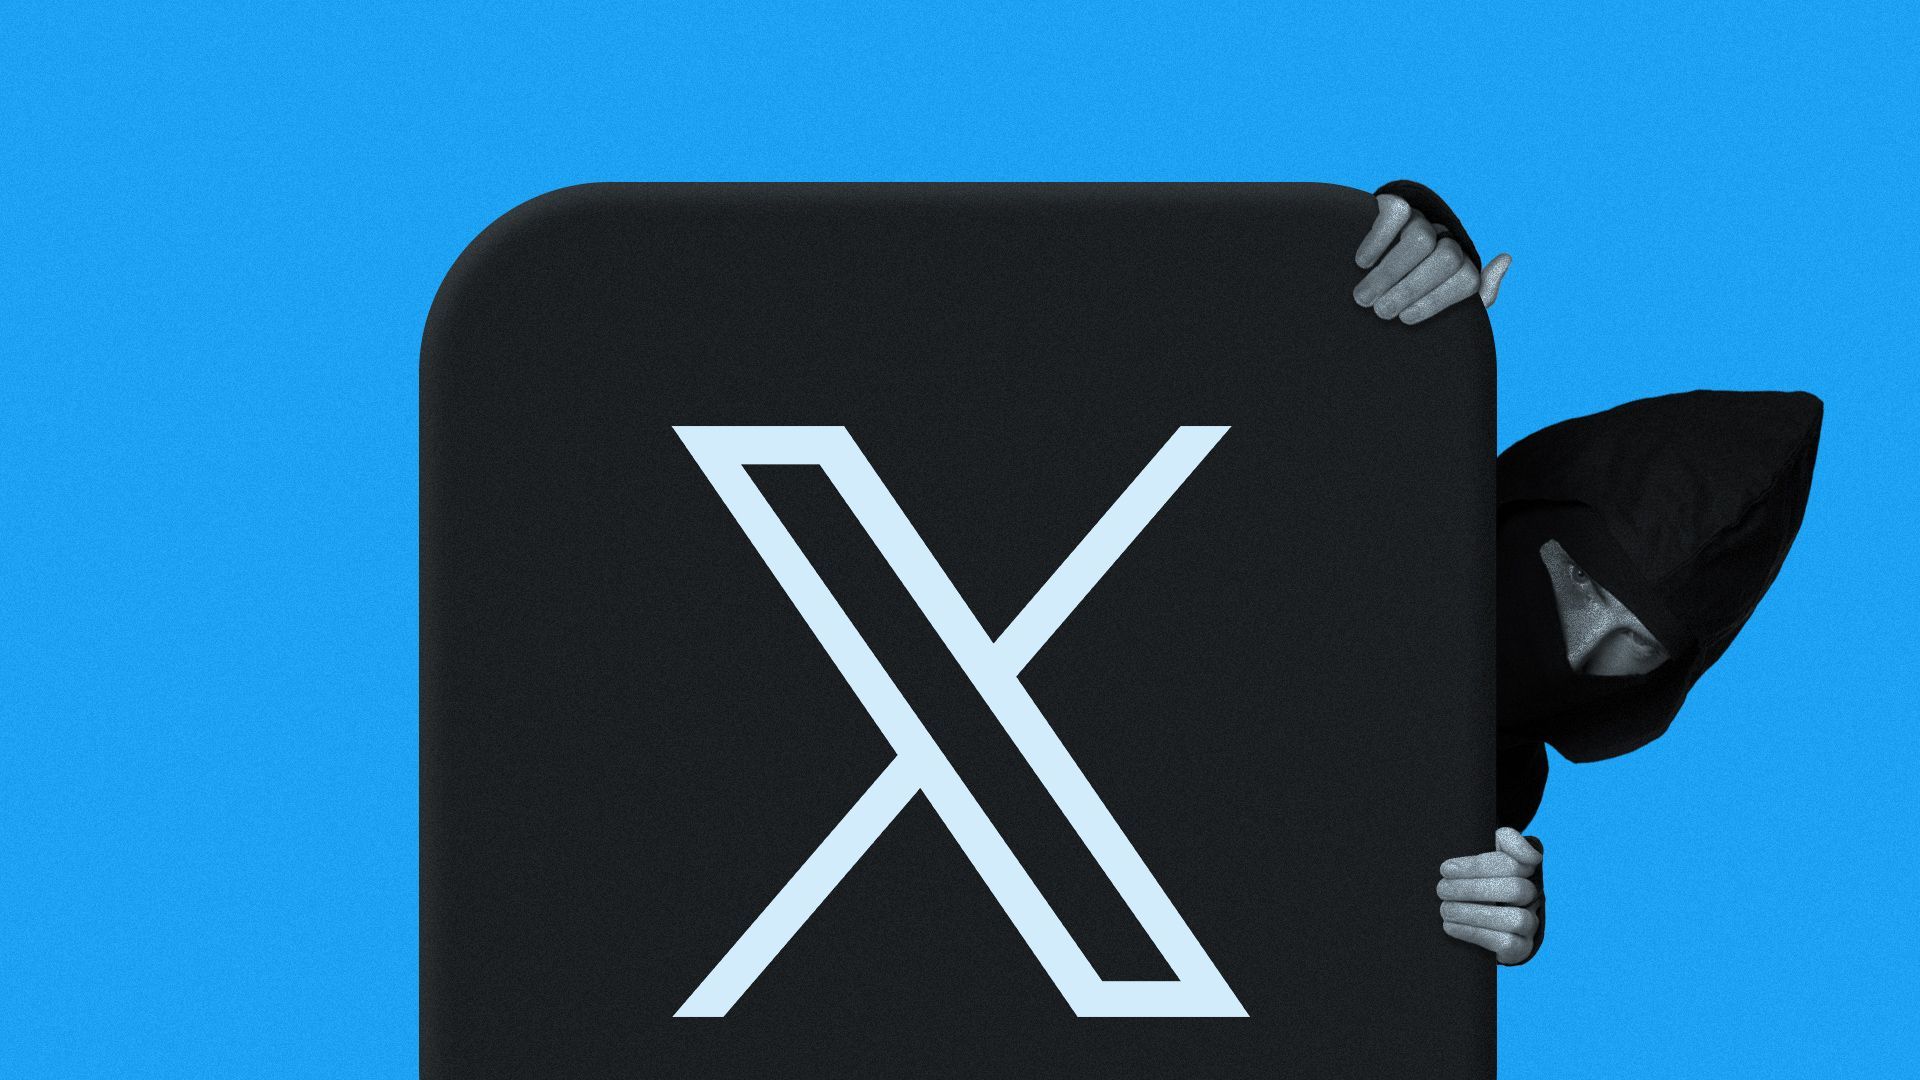 Illustration of an anonymous hooded figure peeking out from behind an X app icon.